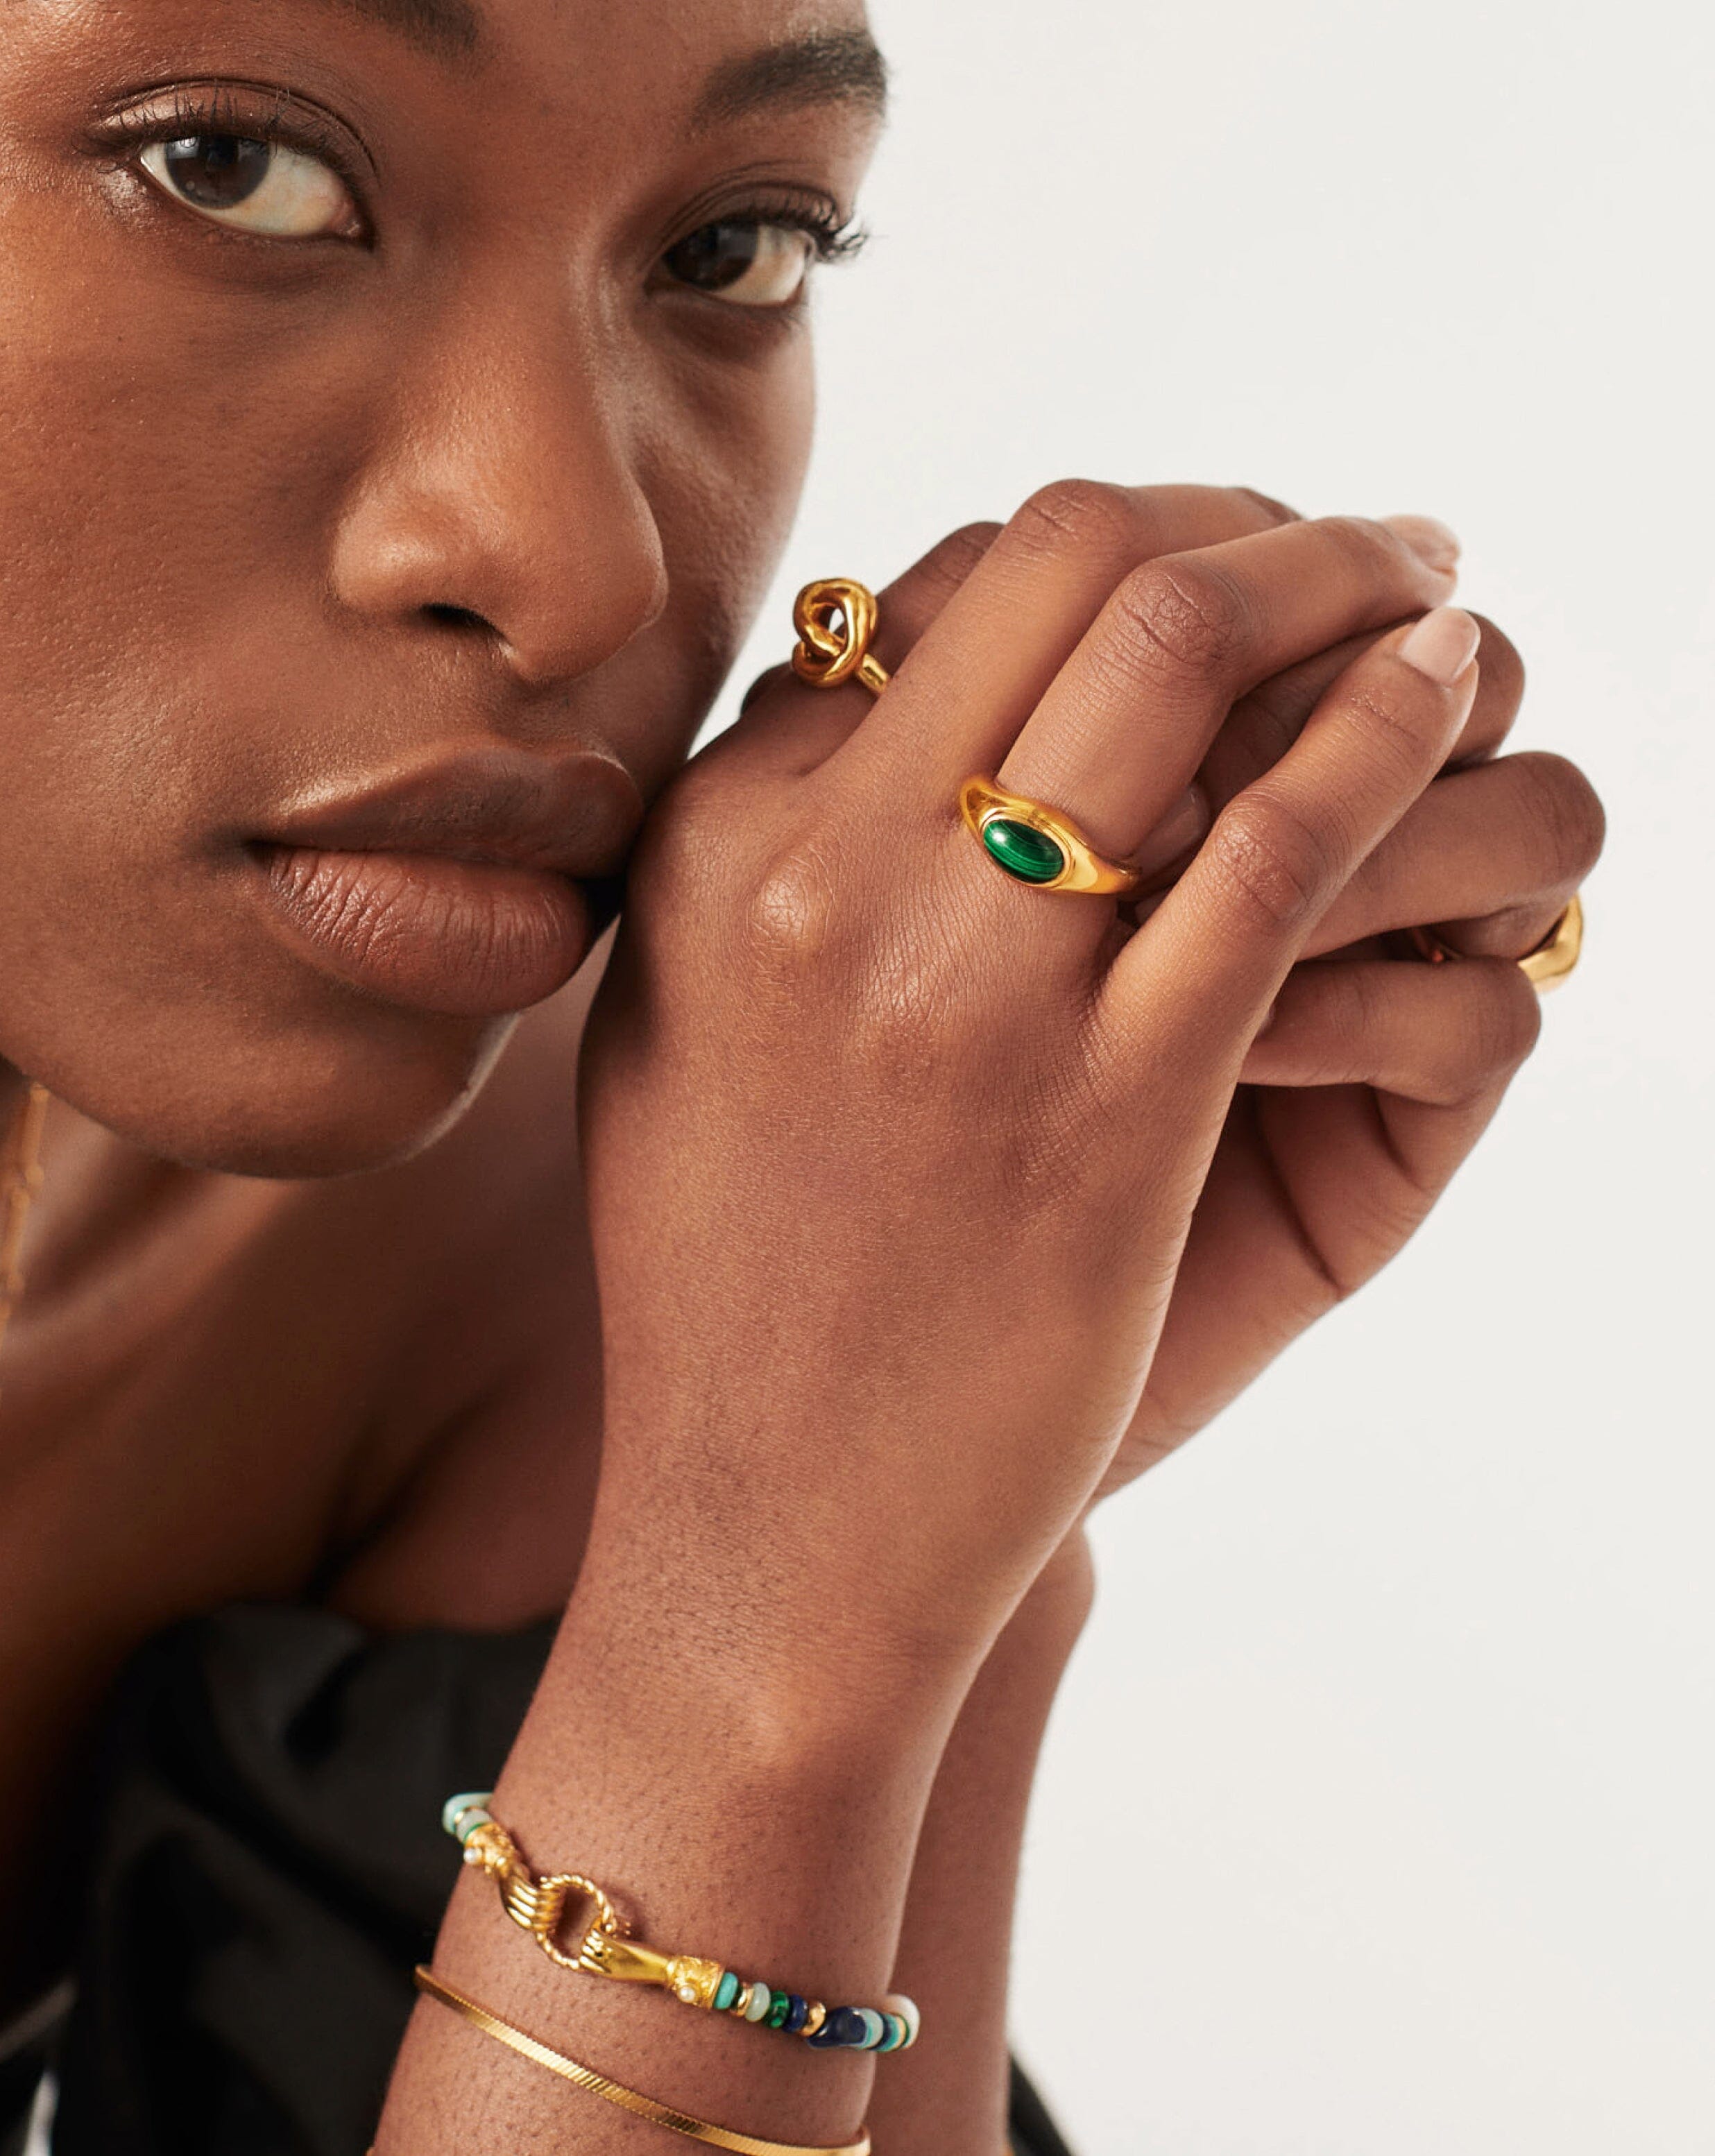 Molten Gemstone Ring | 18ct Gold Plated Vermeil/Malachite Rings Missoma 